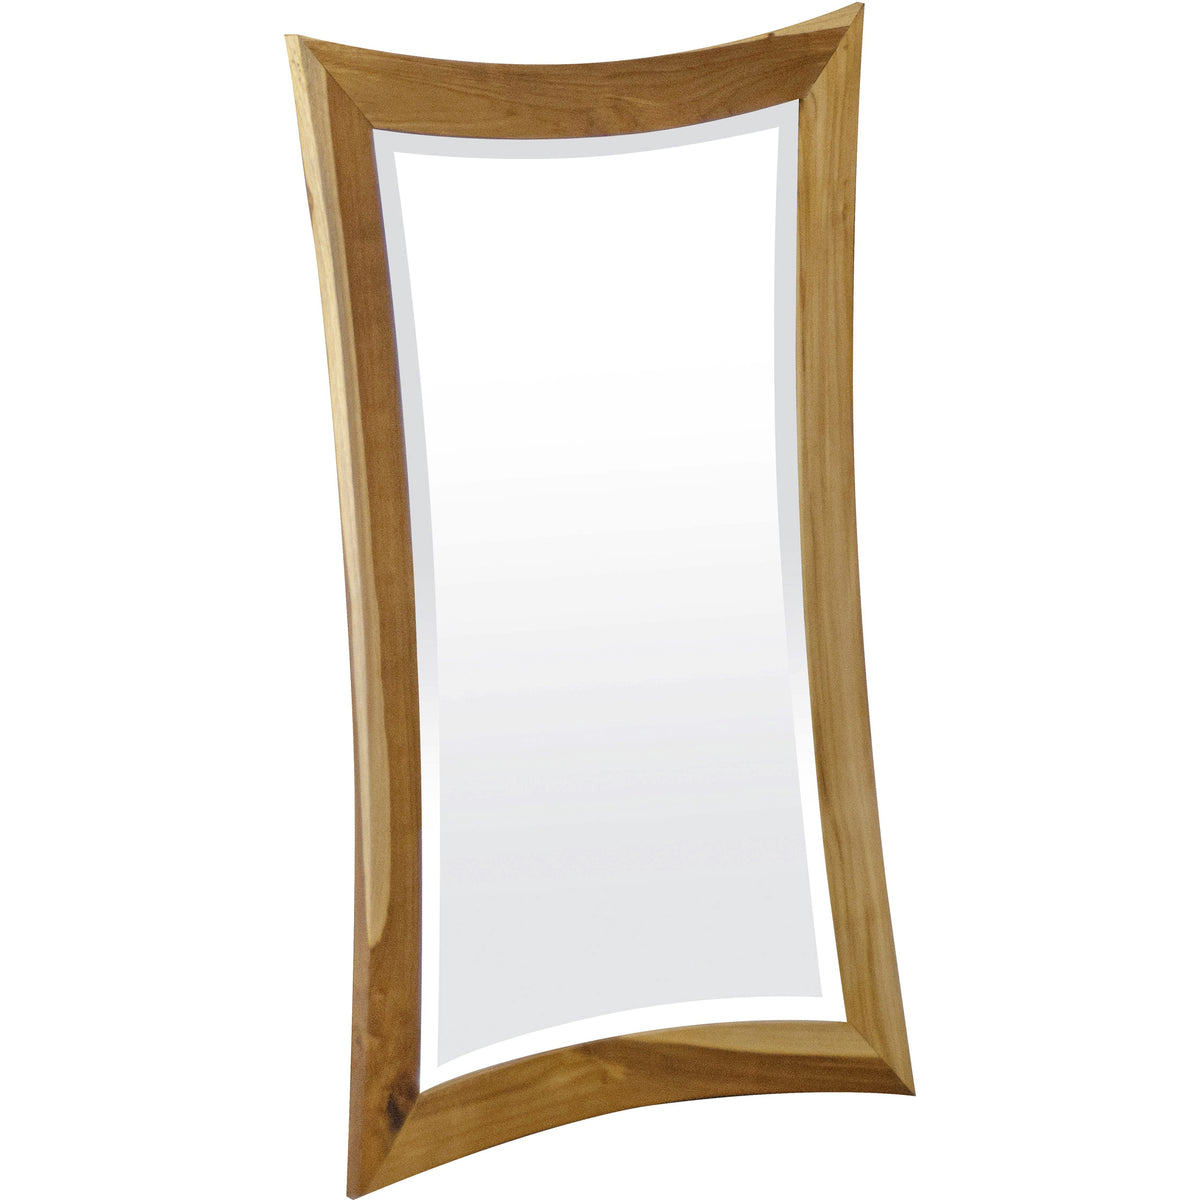 Modern Curves Solid Teak Wall Mirror in Natural Finish